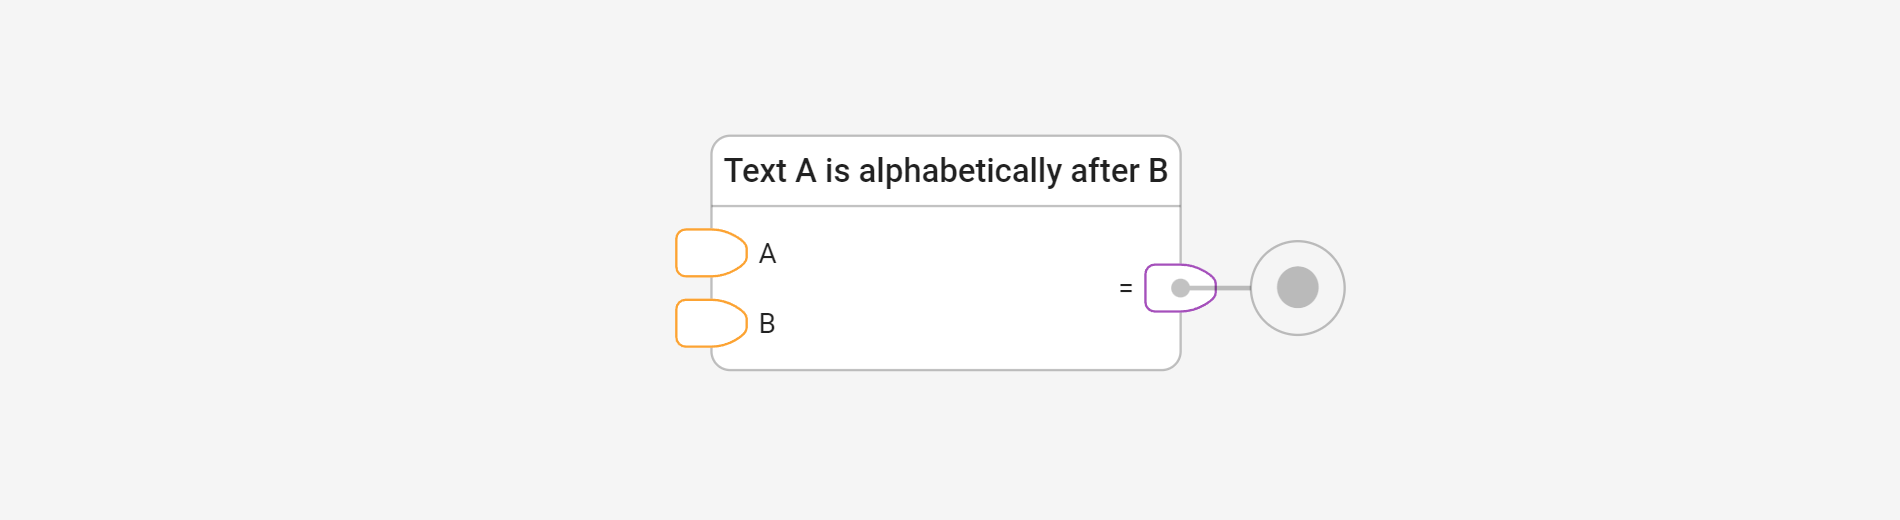 Check order using A is alphabetically after B